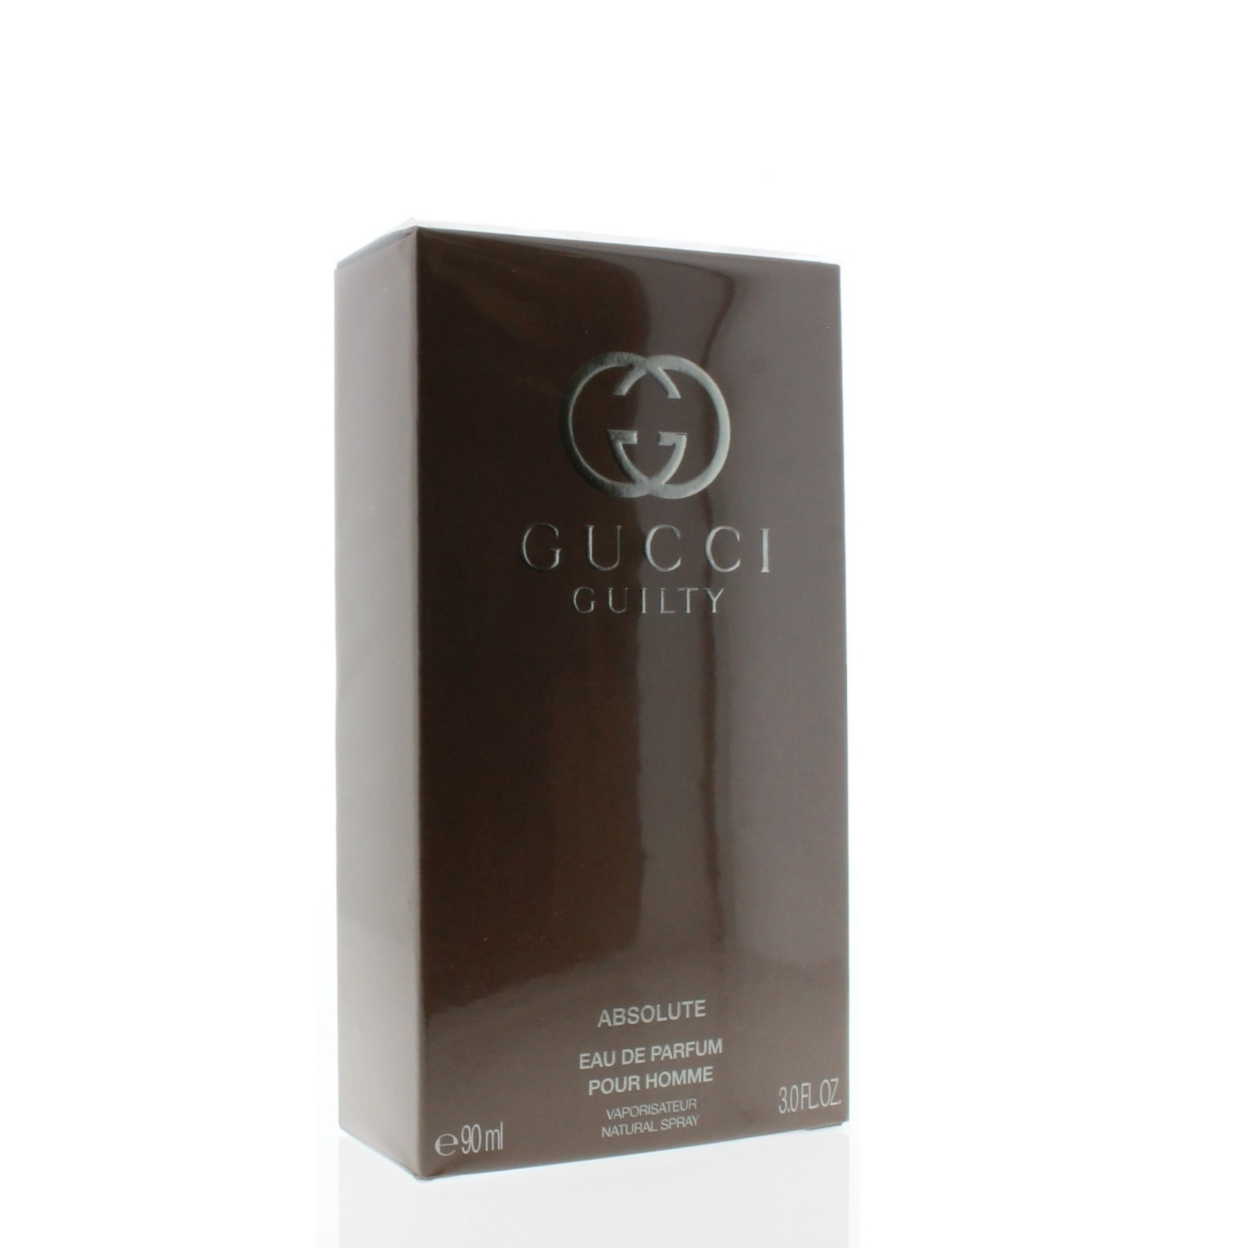 Gucci Guilty Absolute Edp Spray For Men 3oz/90ml